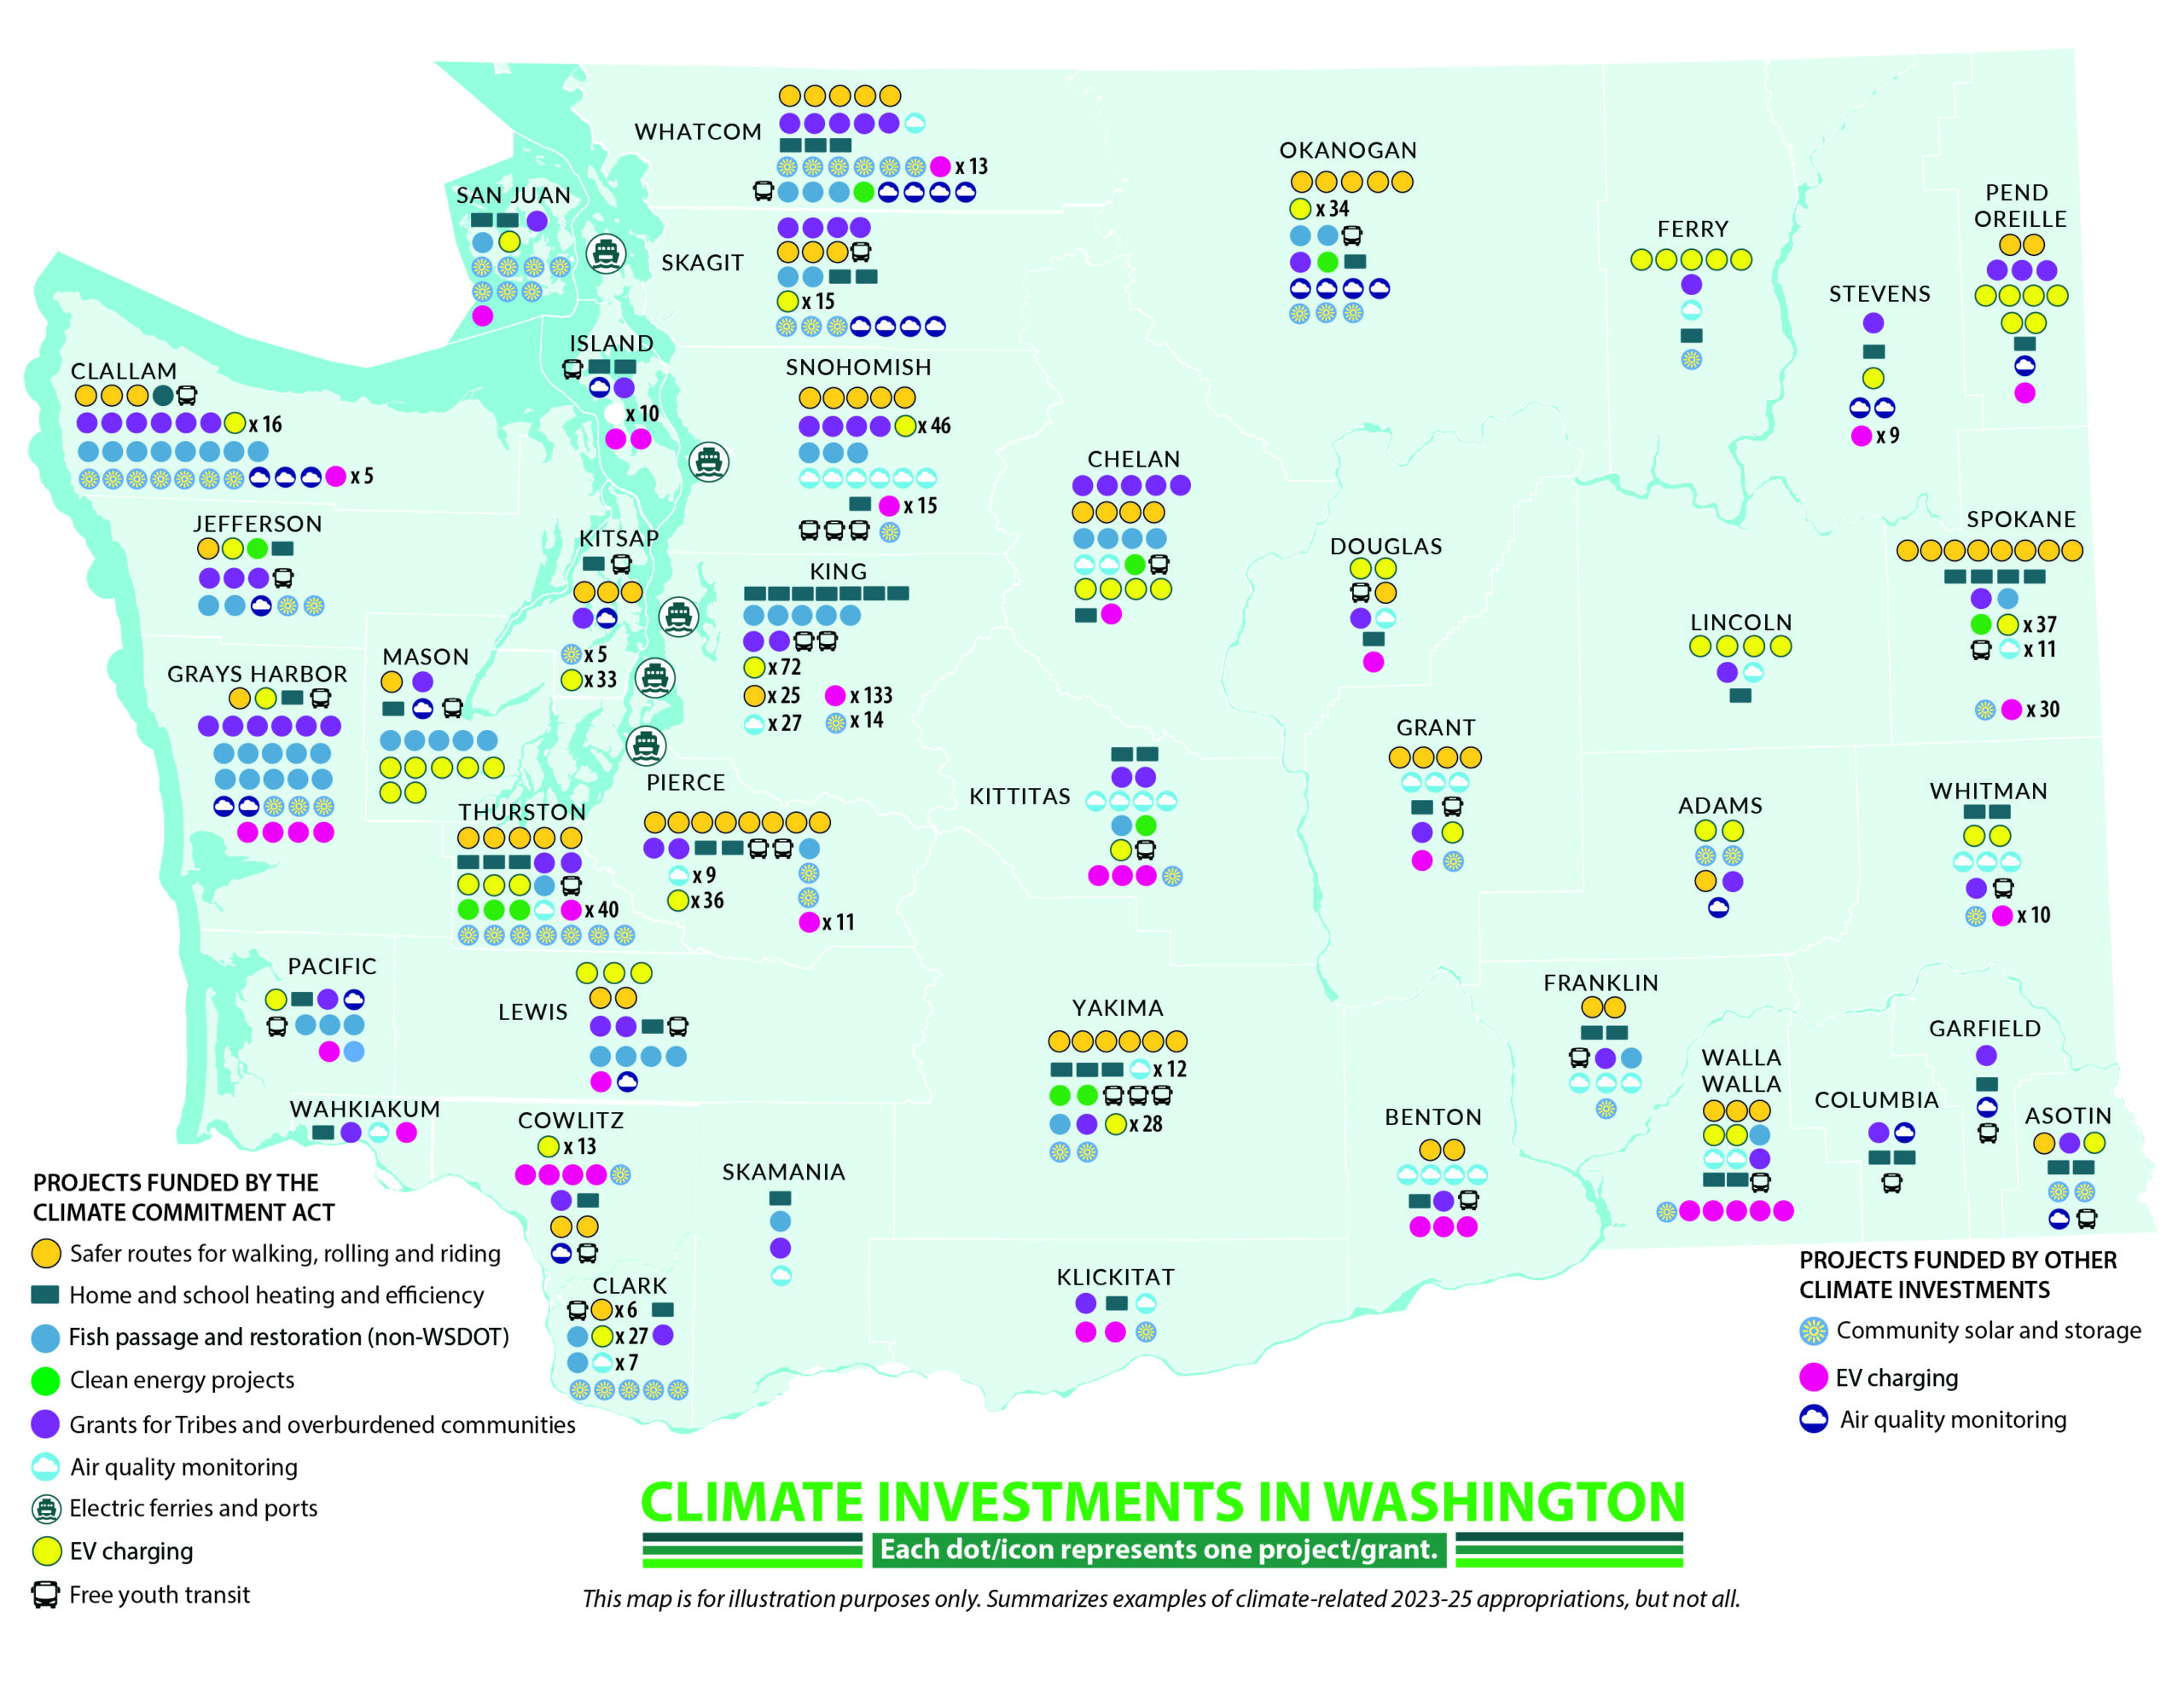 Map of Washington state. Small icons dot the image of the state to indicate where Climate Commitment Act projects are across the state.